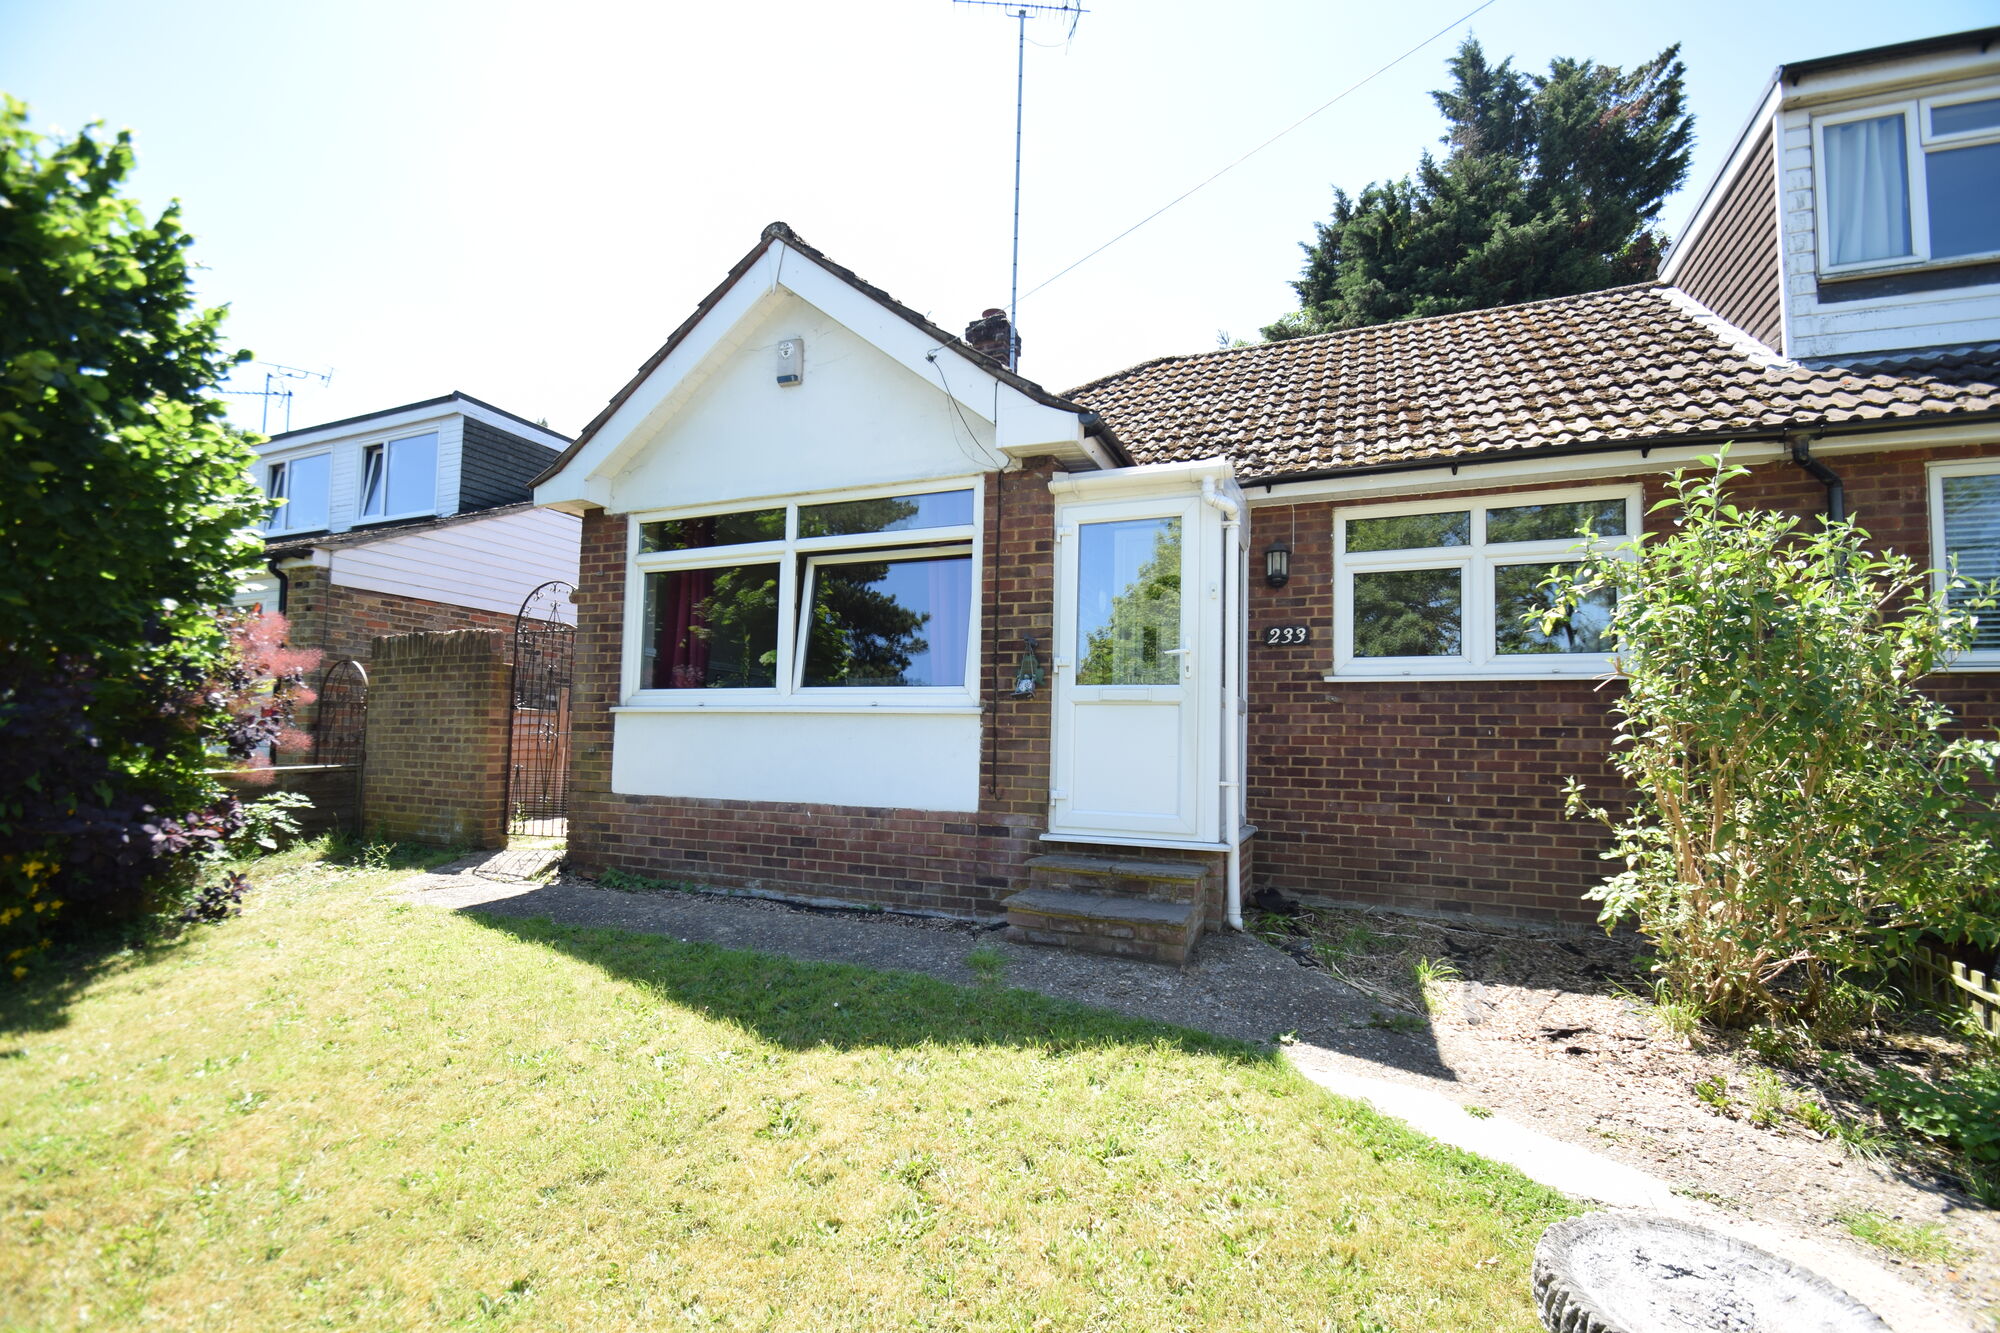 2 bedroom detached bungalow to rent, Available now Boundary Road, Loudwater, HP10, main image